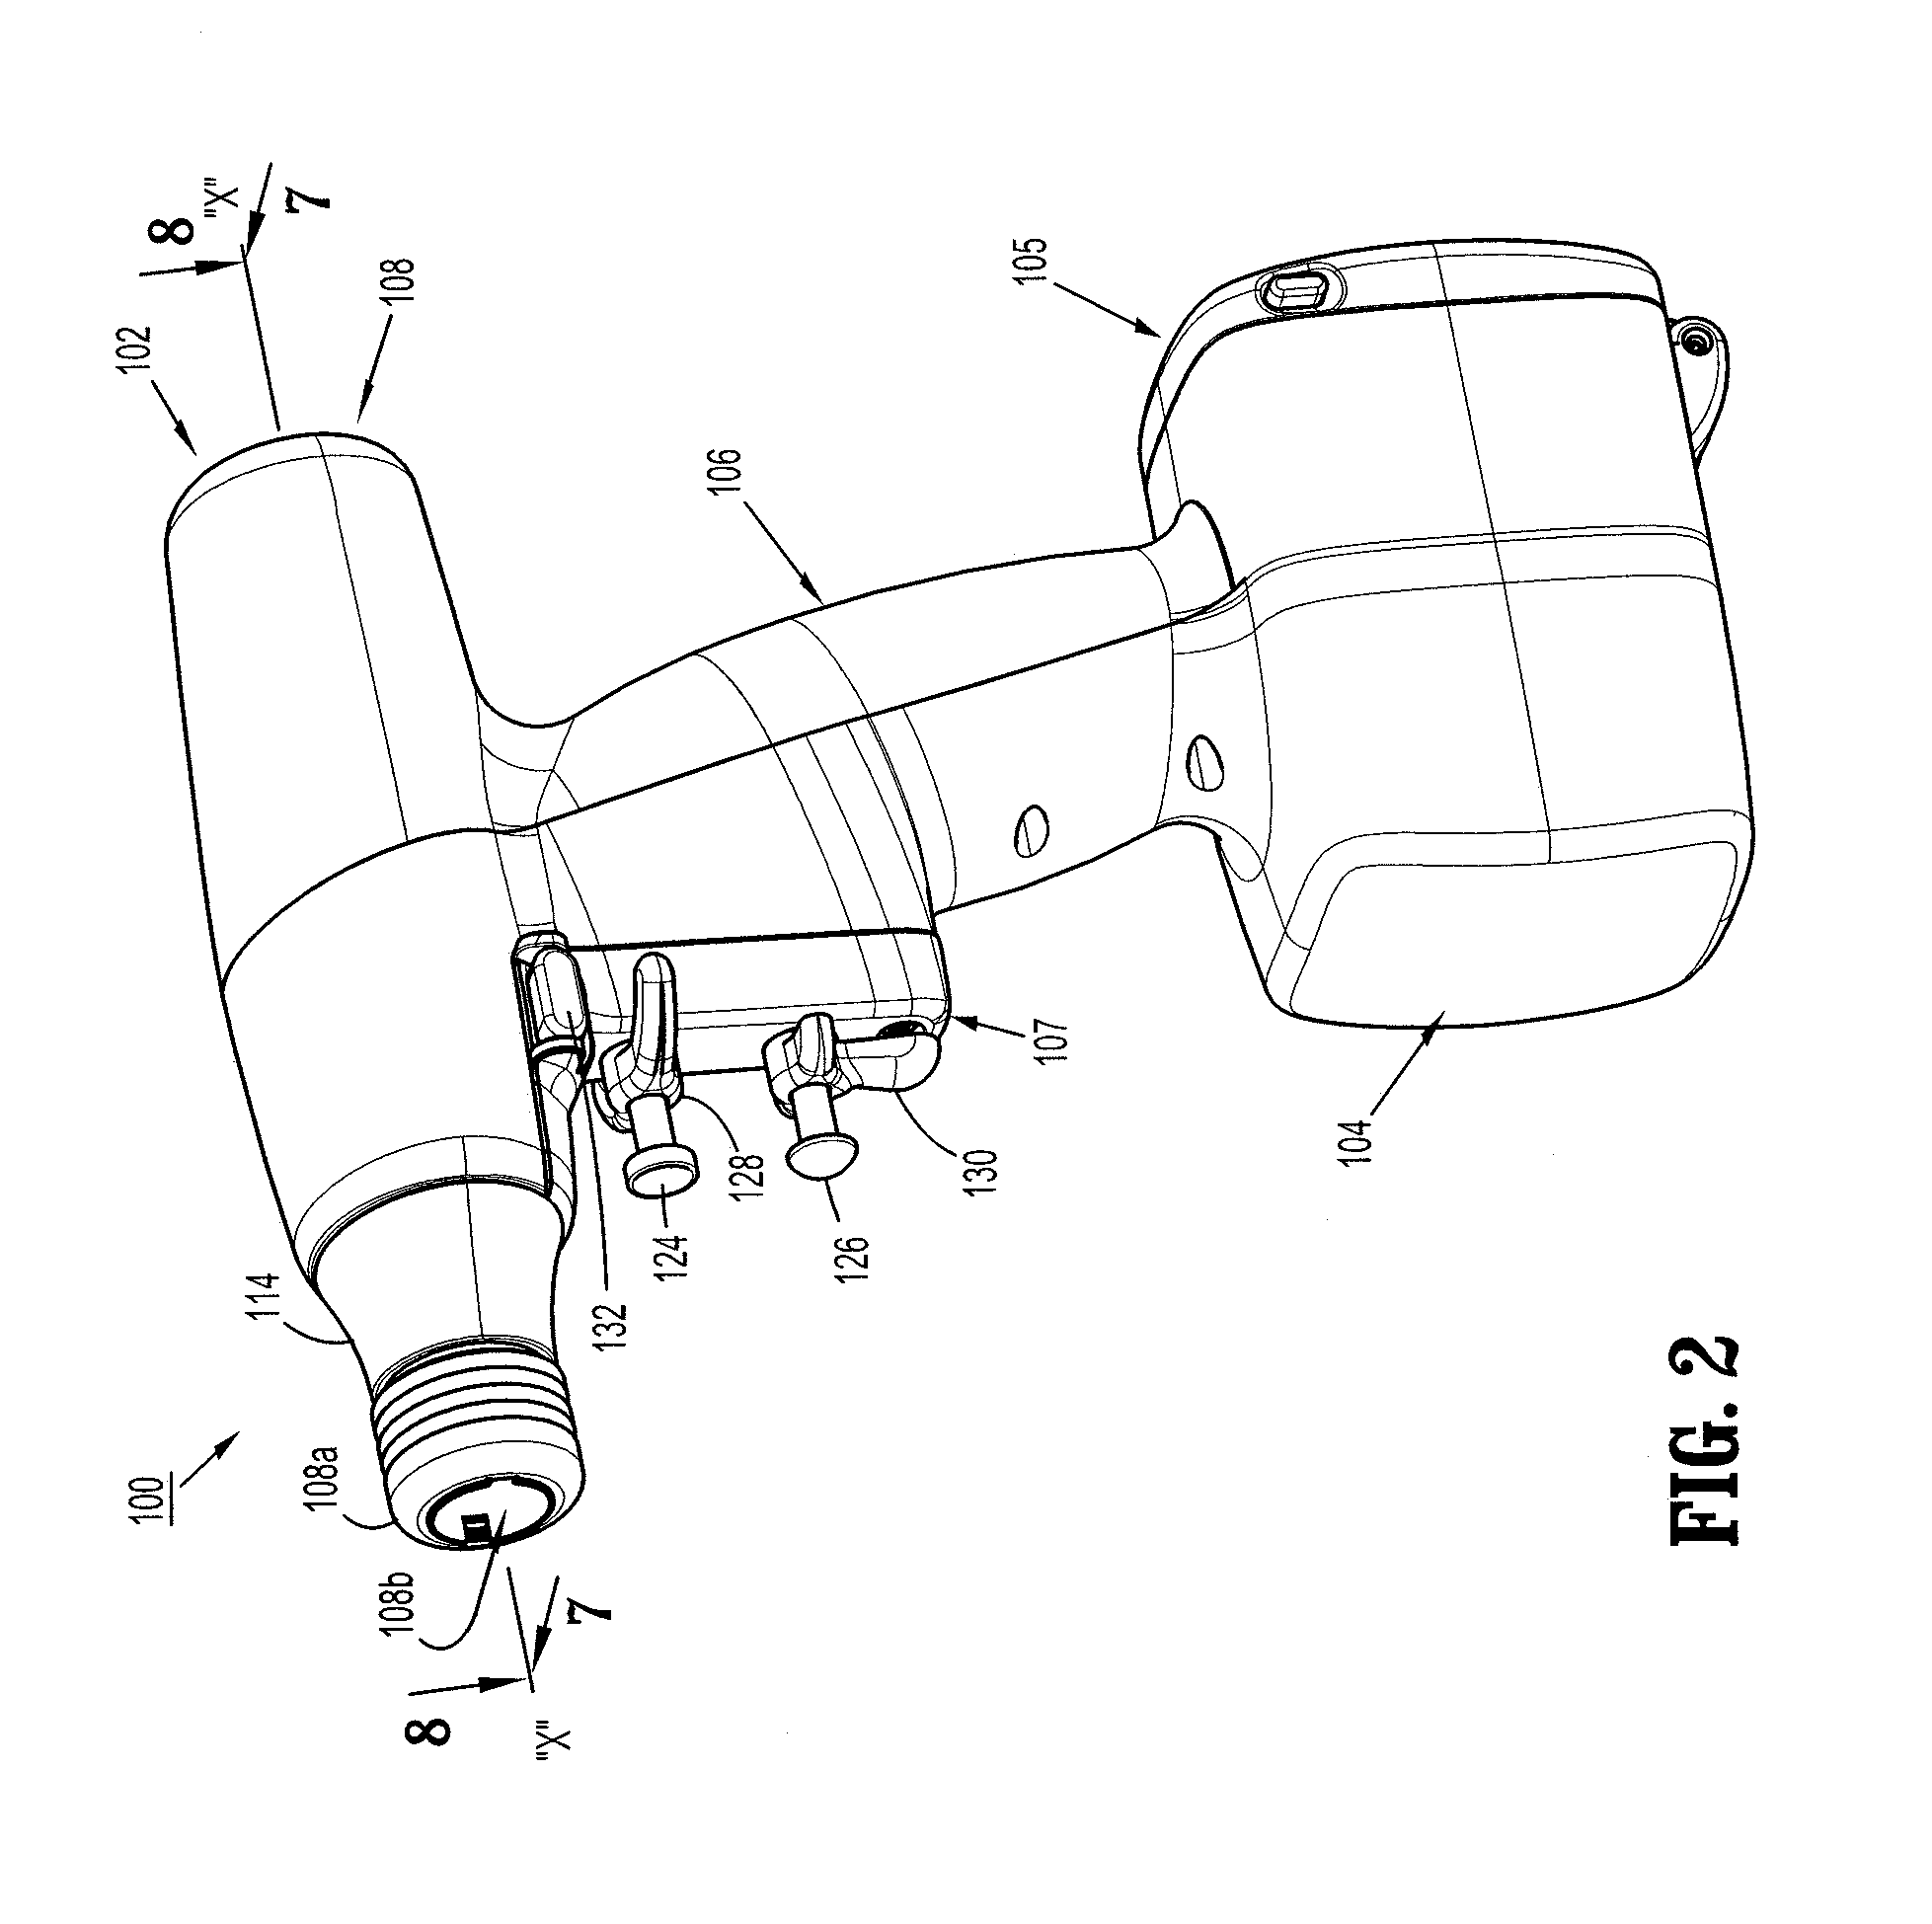 Surgical instrument with rapid post event detection